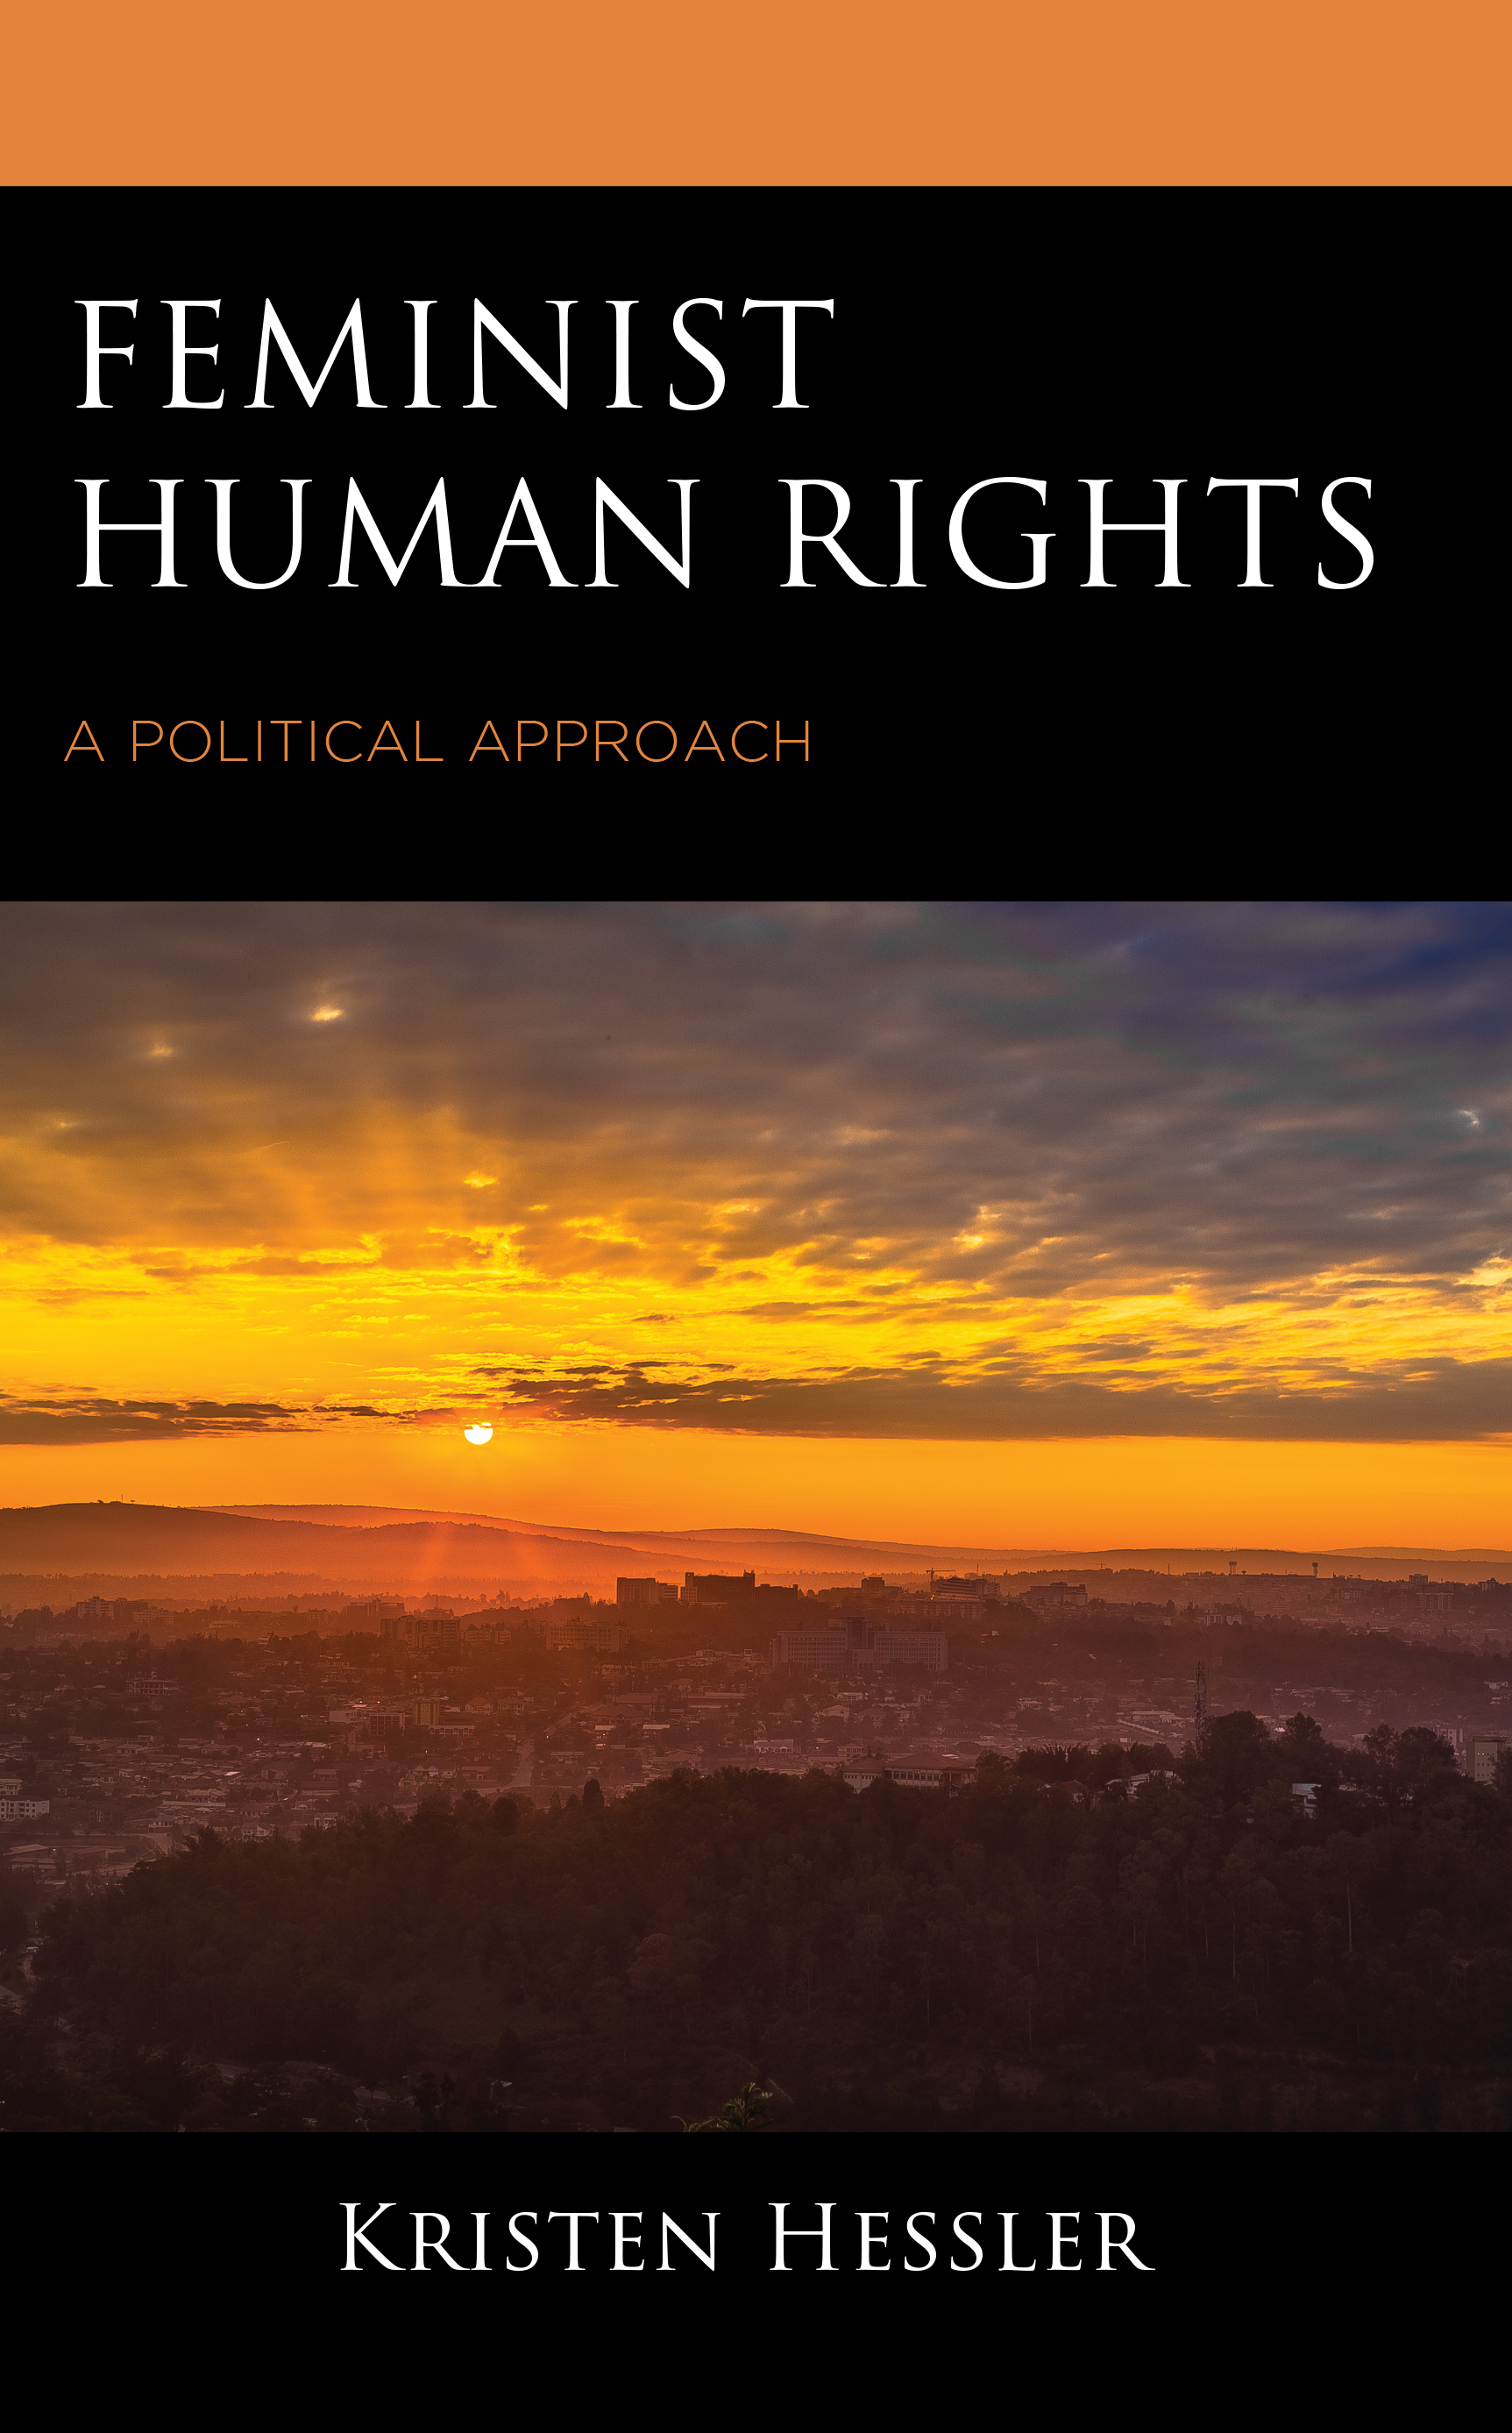 Feminist Human Rights: A Political Approach